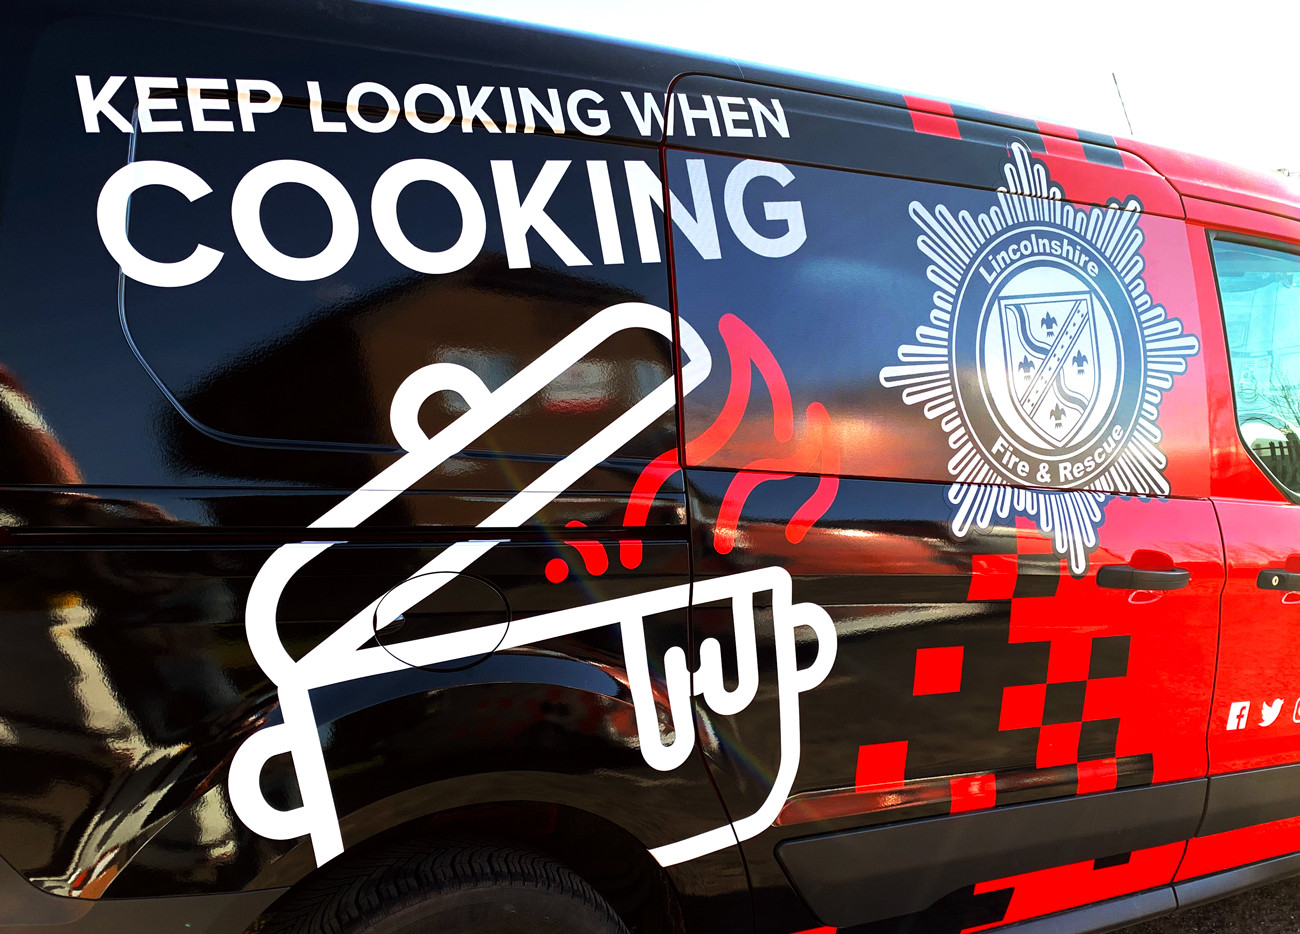 Lincolnshire fire and rescue van graphic wraps by Root Studio 1 1